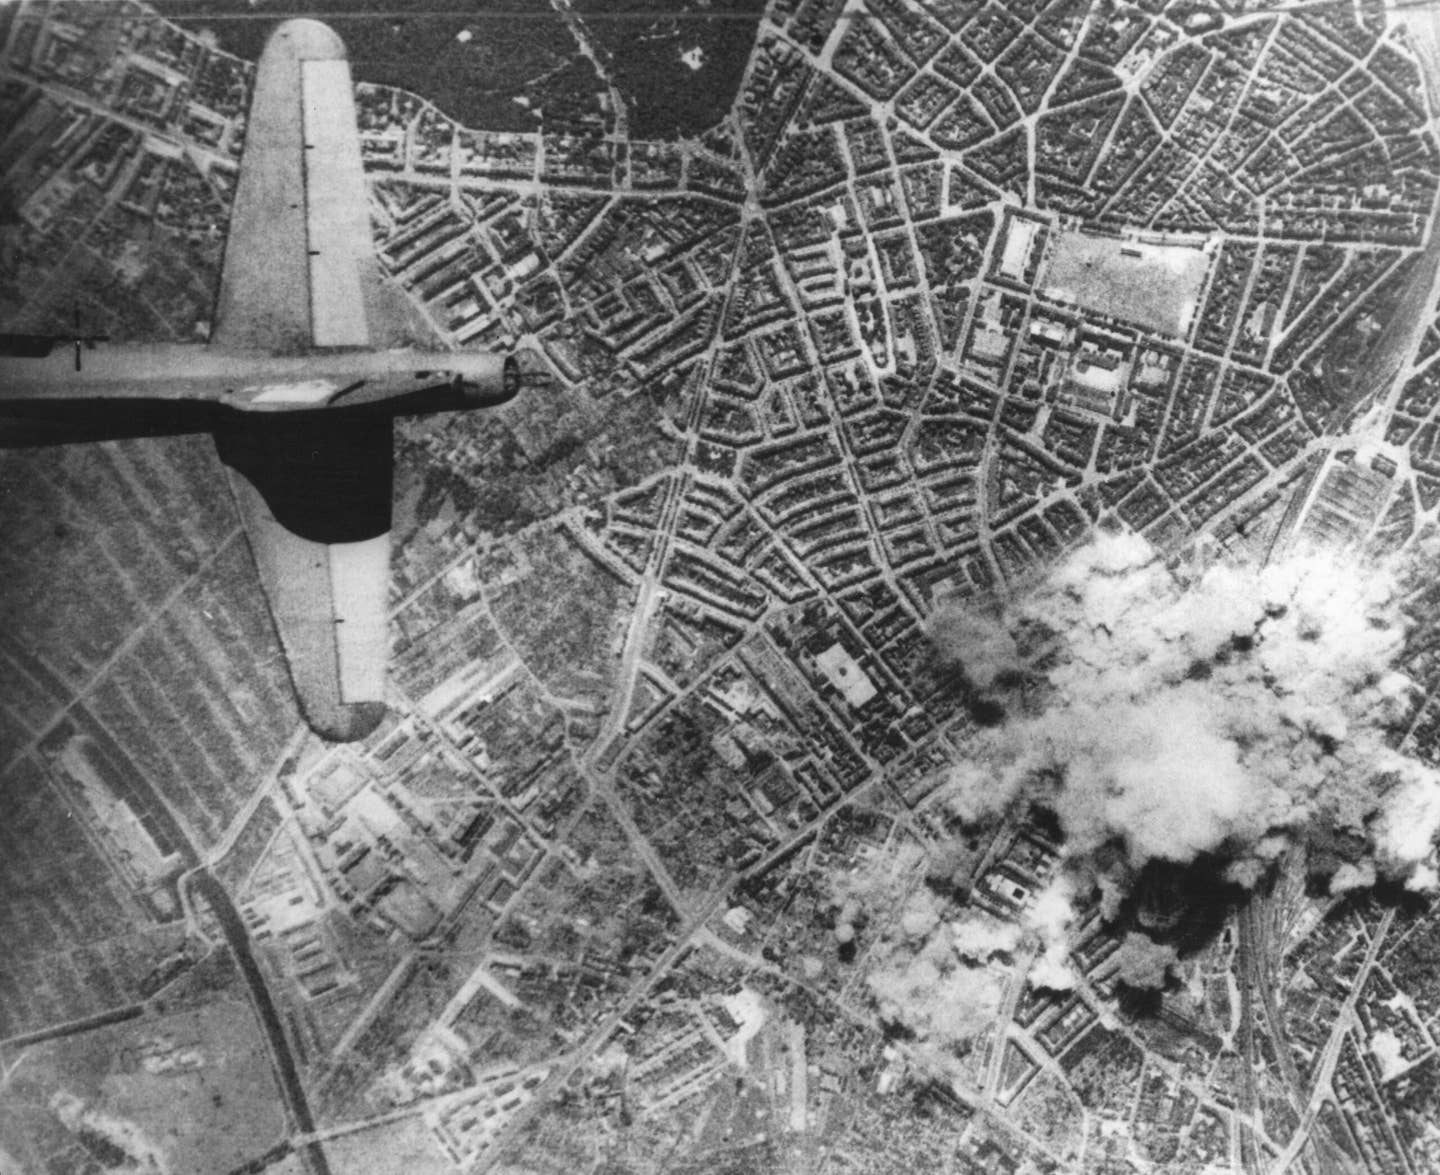 An aerial view of Hamburg as seen from a formation of USAAF B-17 Flying Fortress bombers during a daylight raid. <em>Photo by SSPL/Getty Images</em>